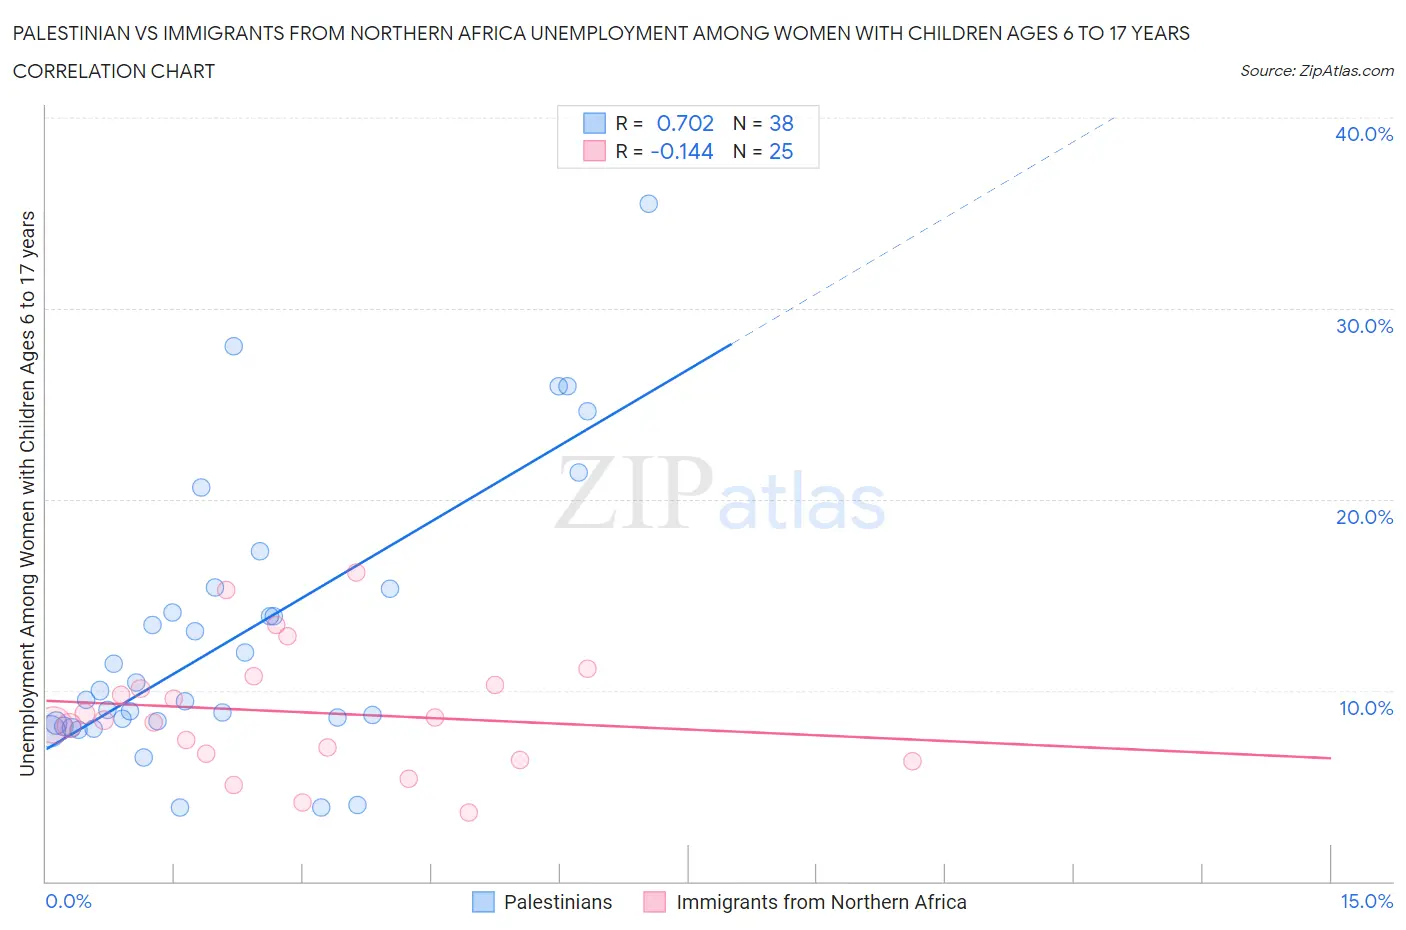 Palestinian vs Immigrants from Northern Africa Unemployment Among Women with Children Ages 6 to 17 years